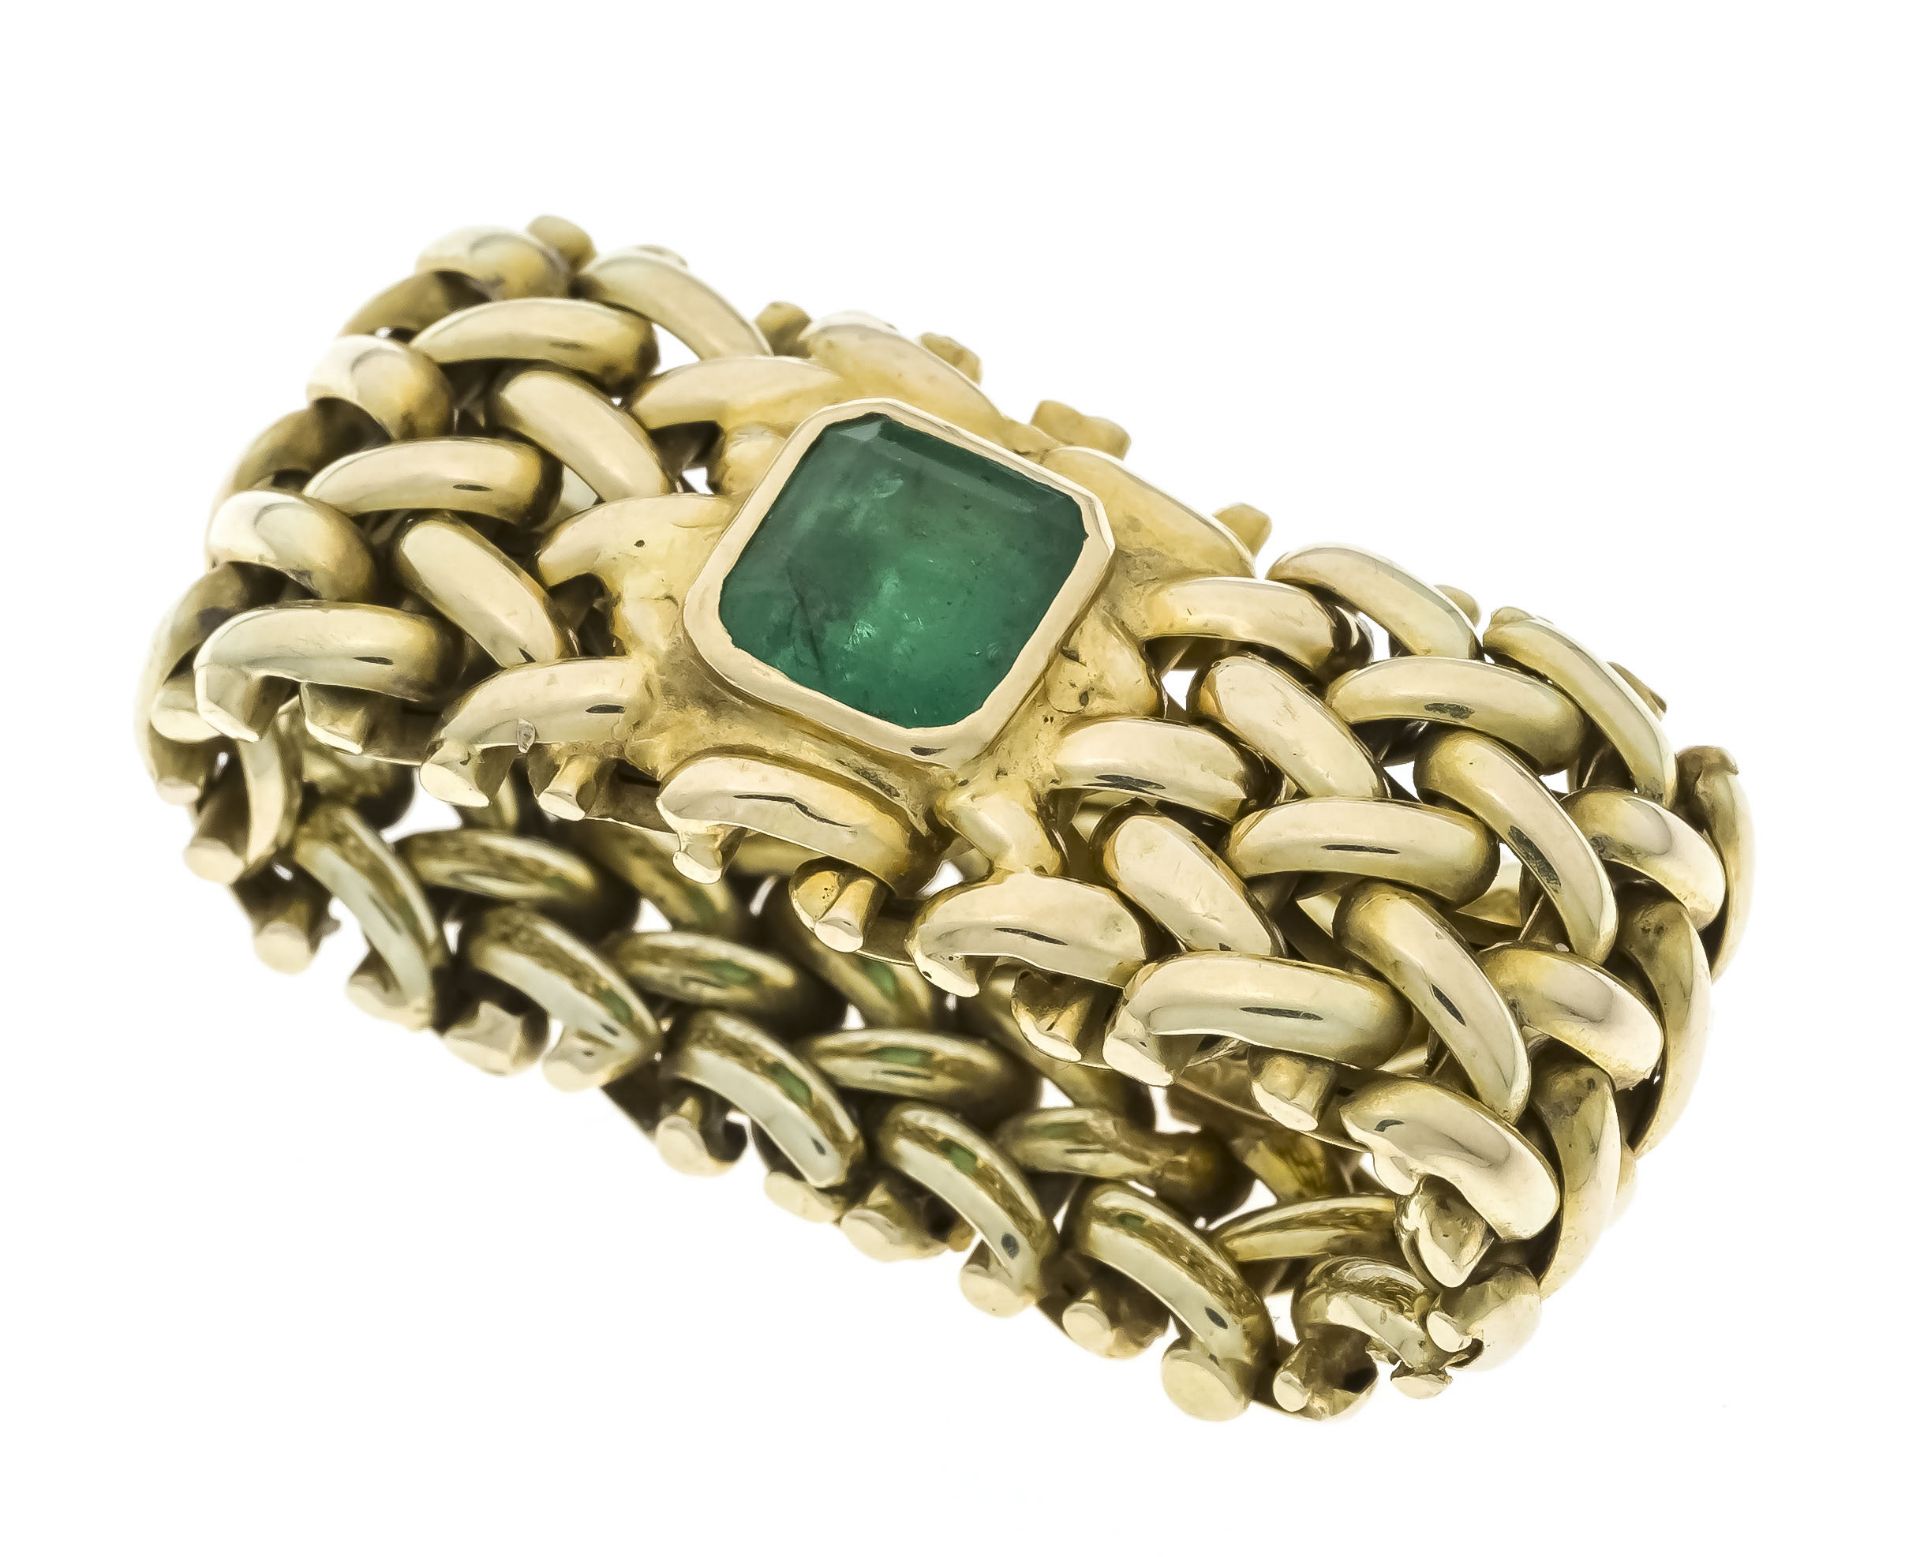 Emerald necklace ring GG 585/000 with a faceted emerald cut emerald 6.7 x 5.7 mm green, translucent, - Image 2 of 2